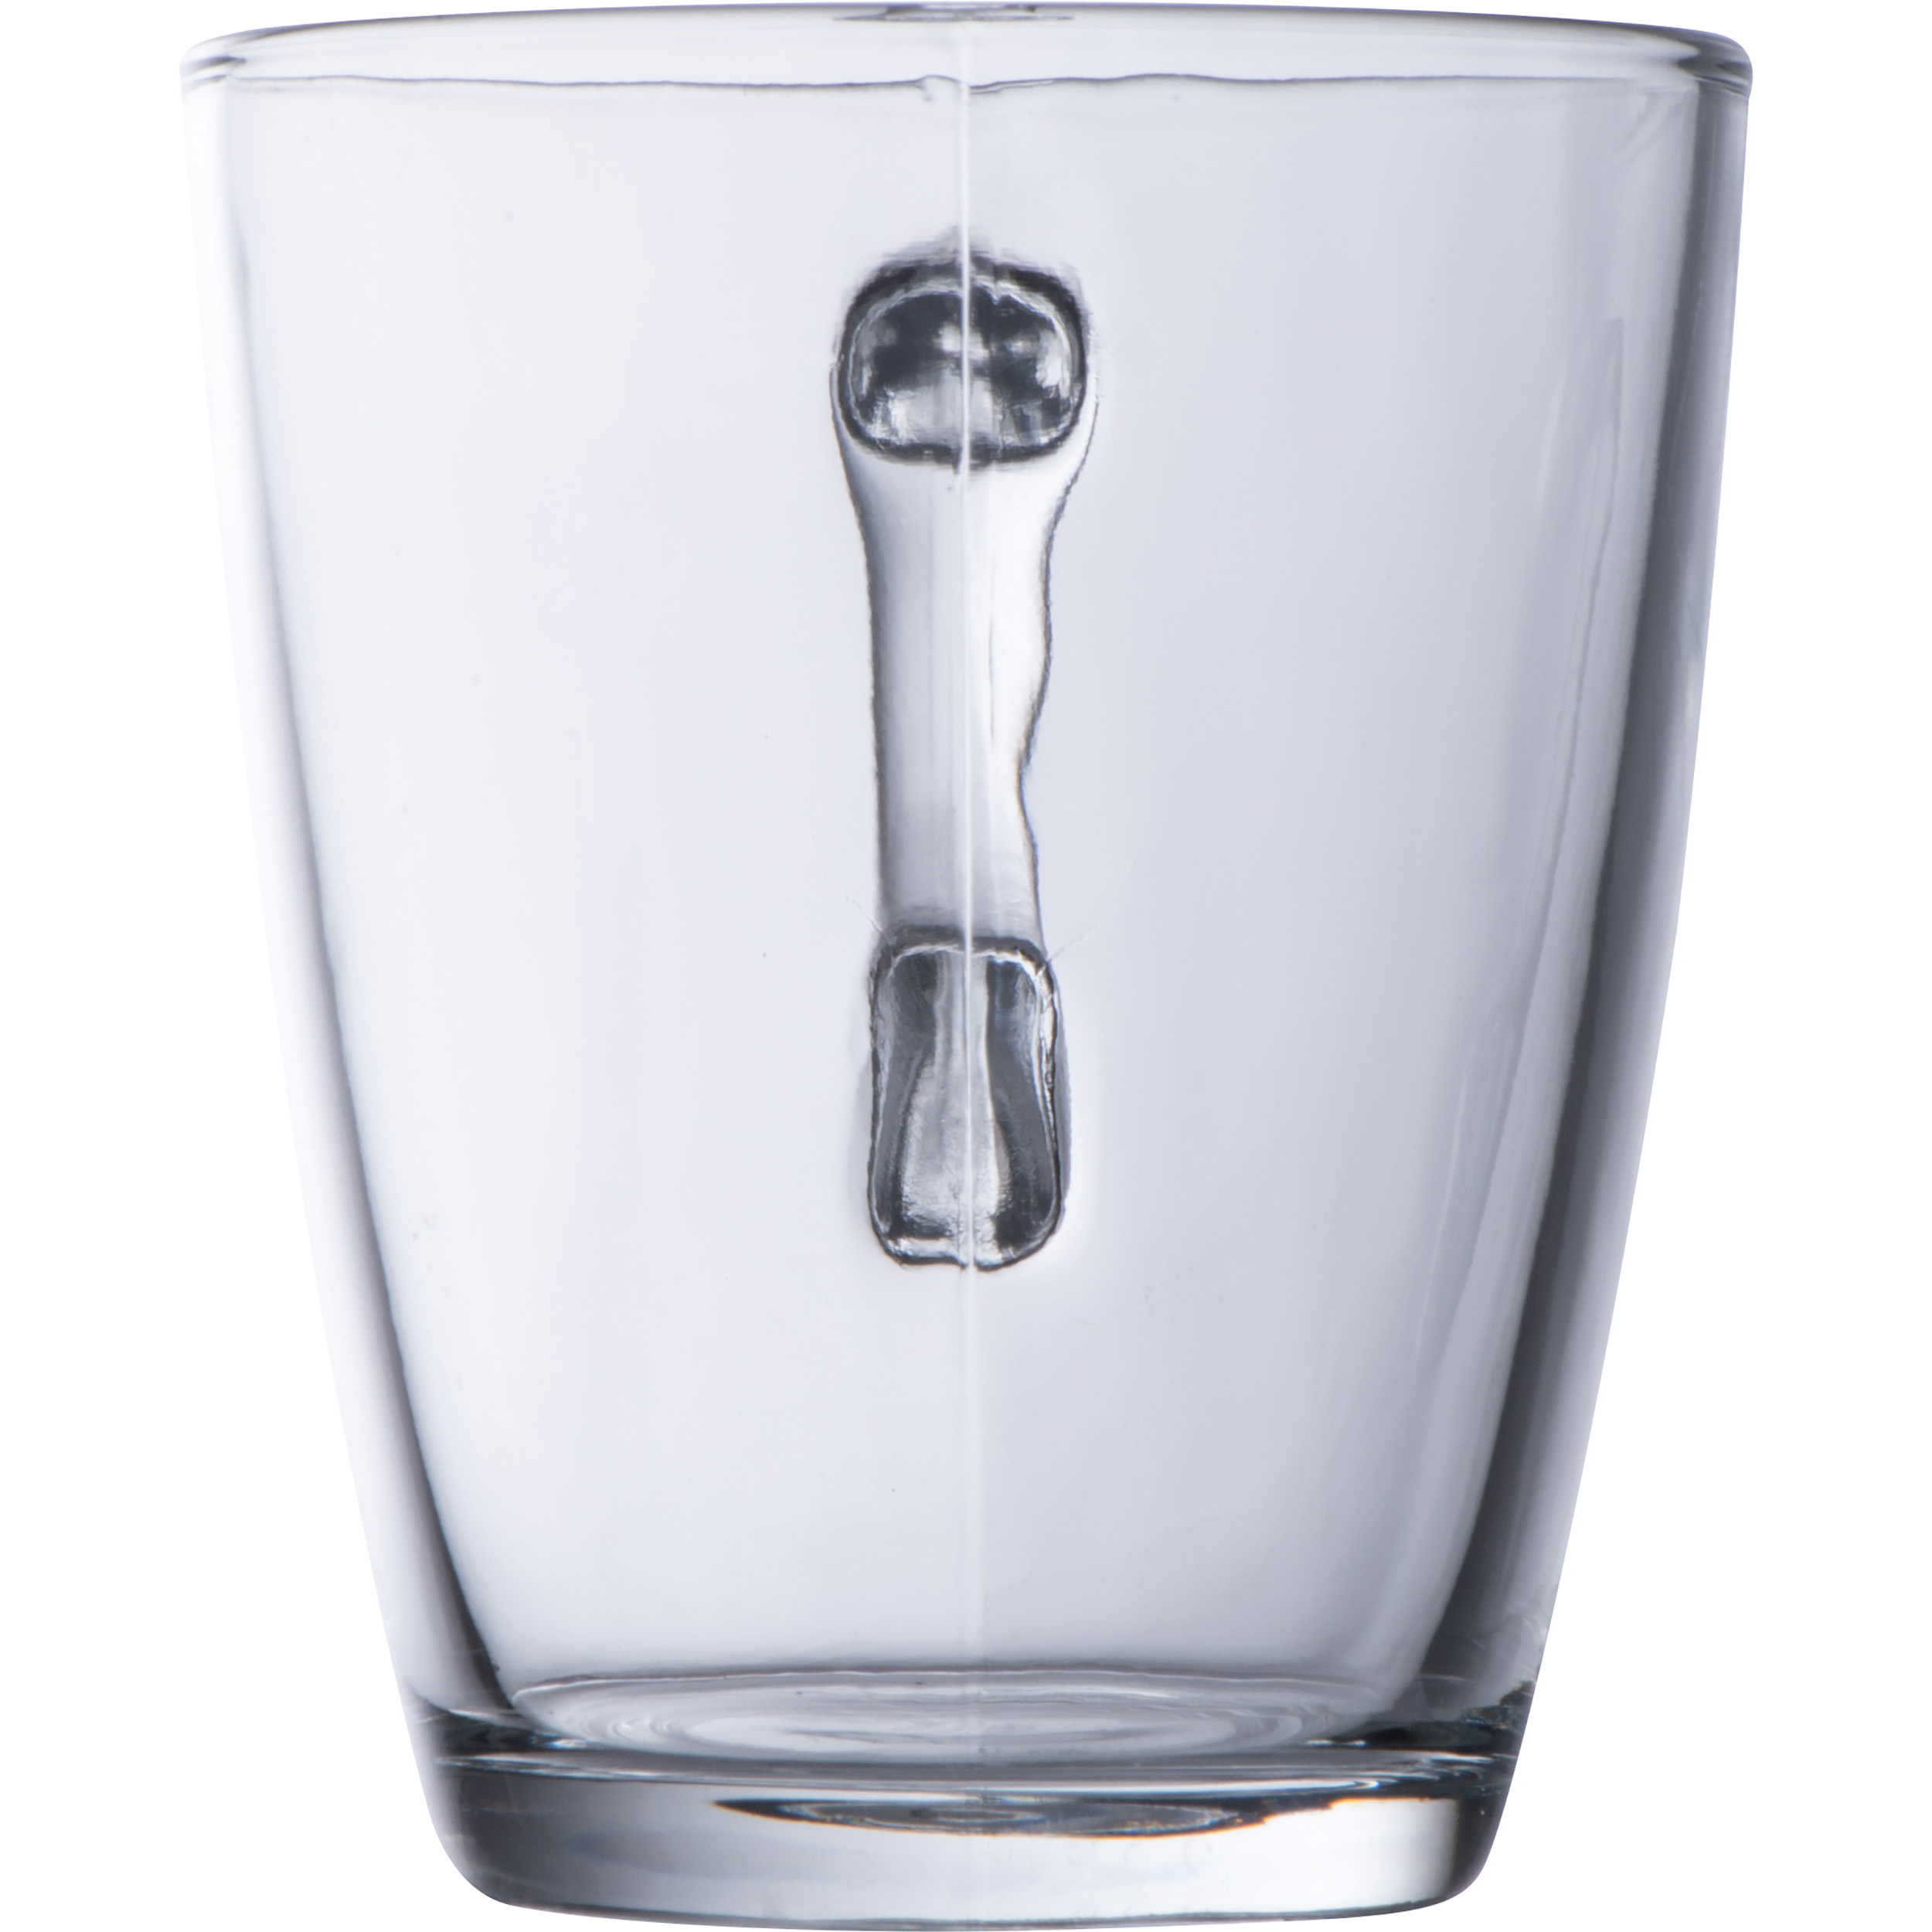 Glass cup, 300 ml